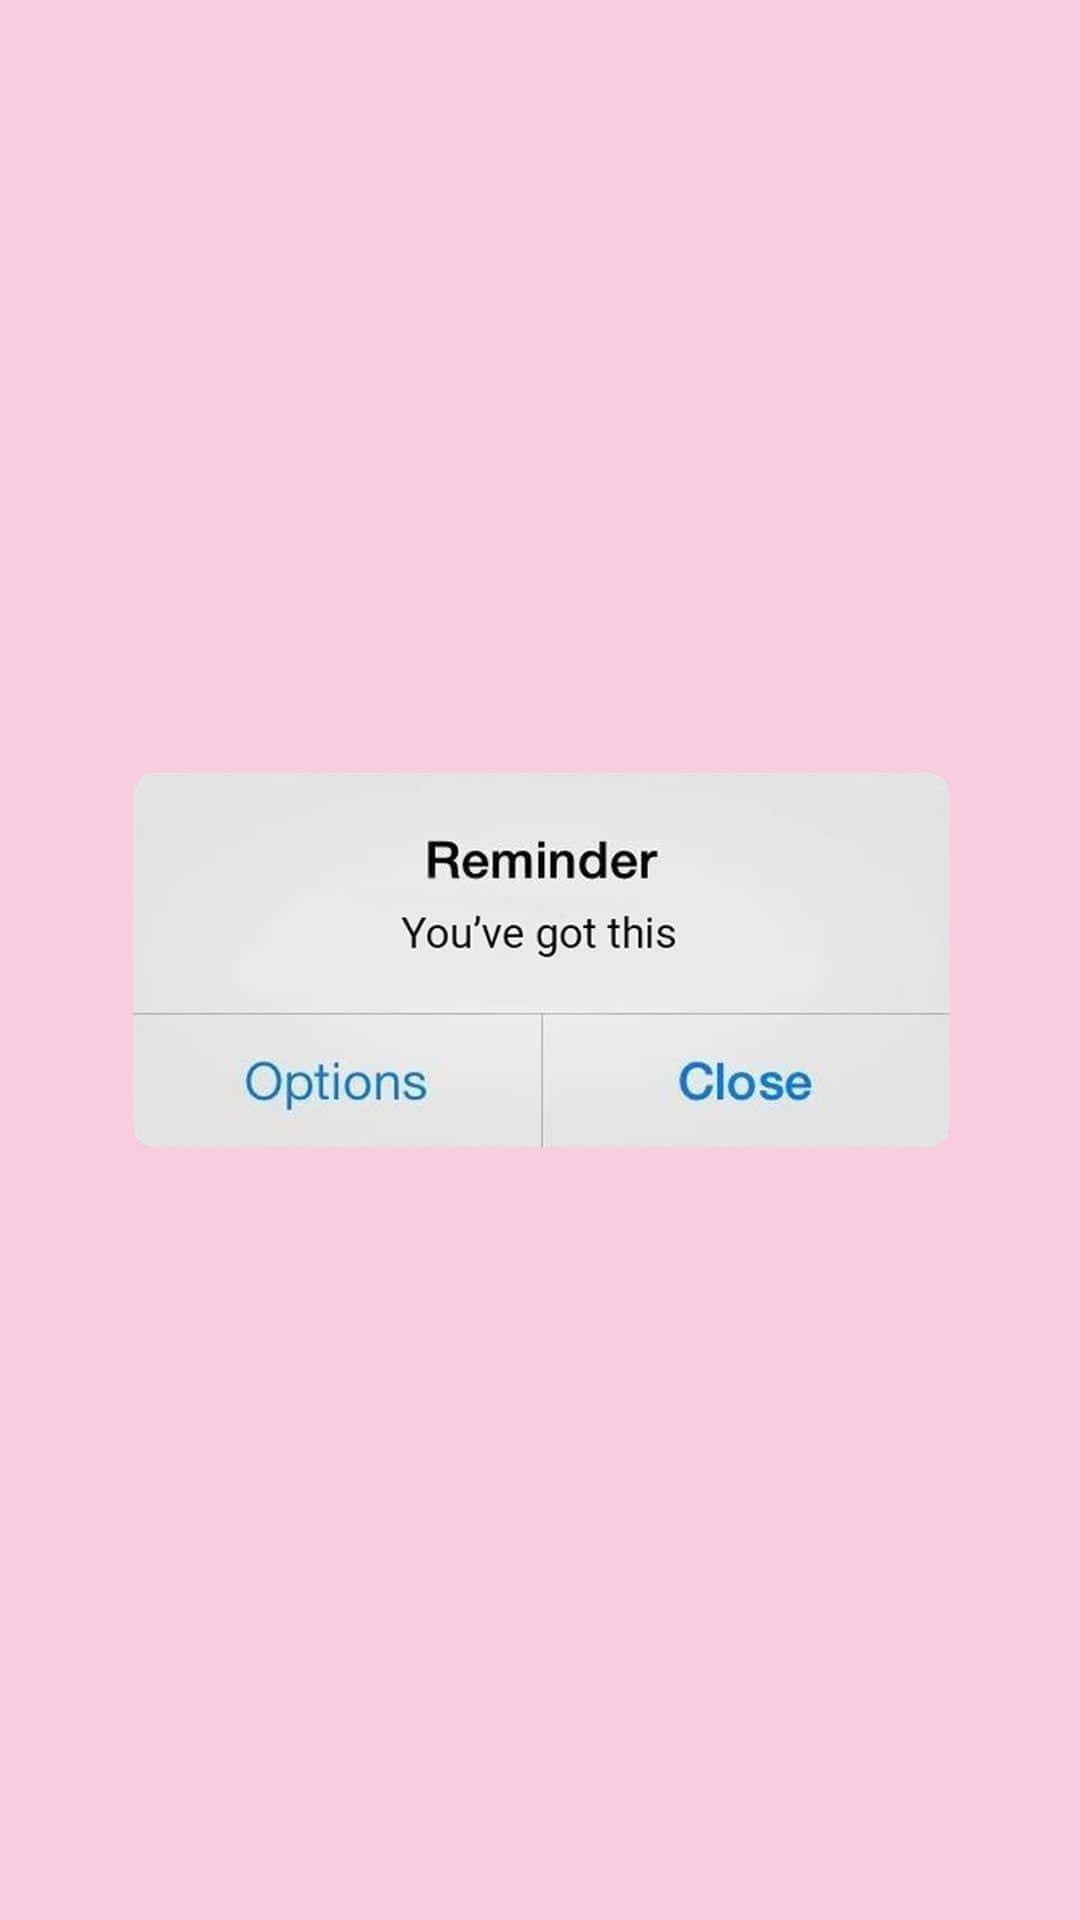 A Reminder Button On An Iphone Screen